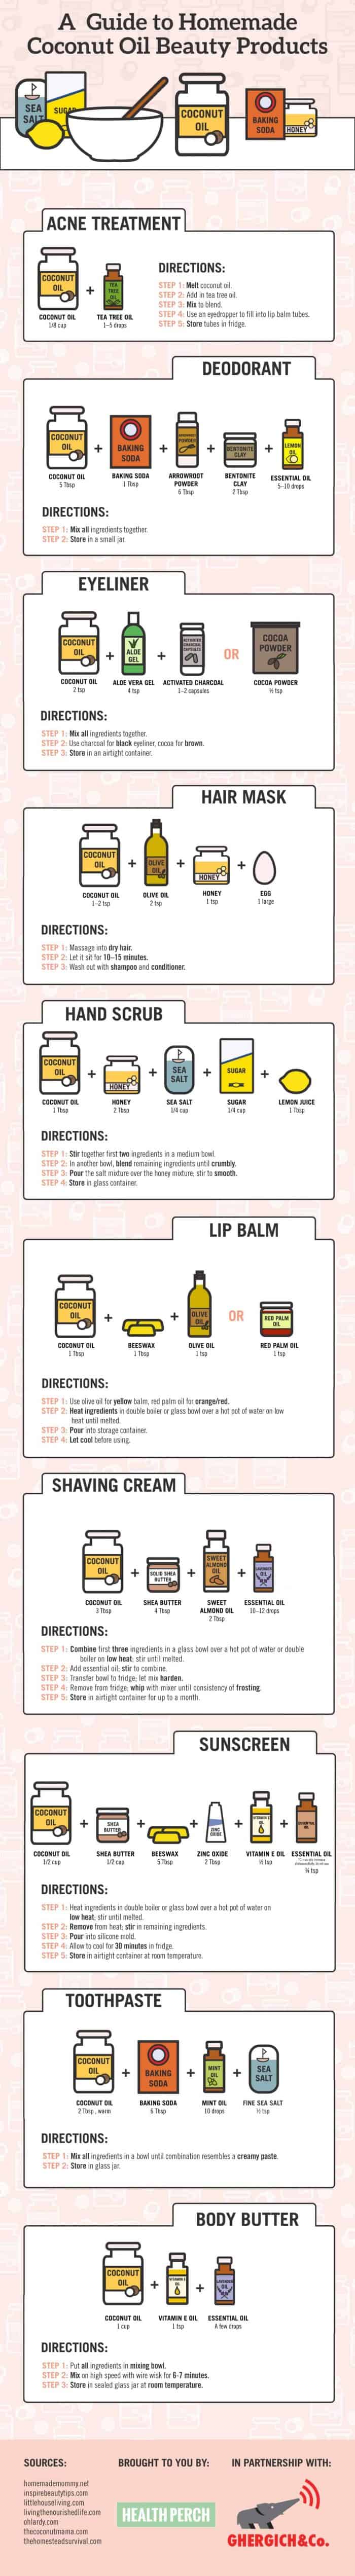 different recipes for beauty products made with coconut oil